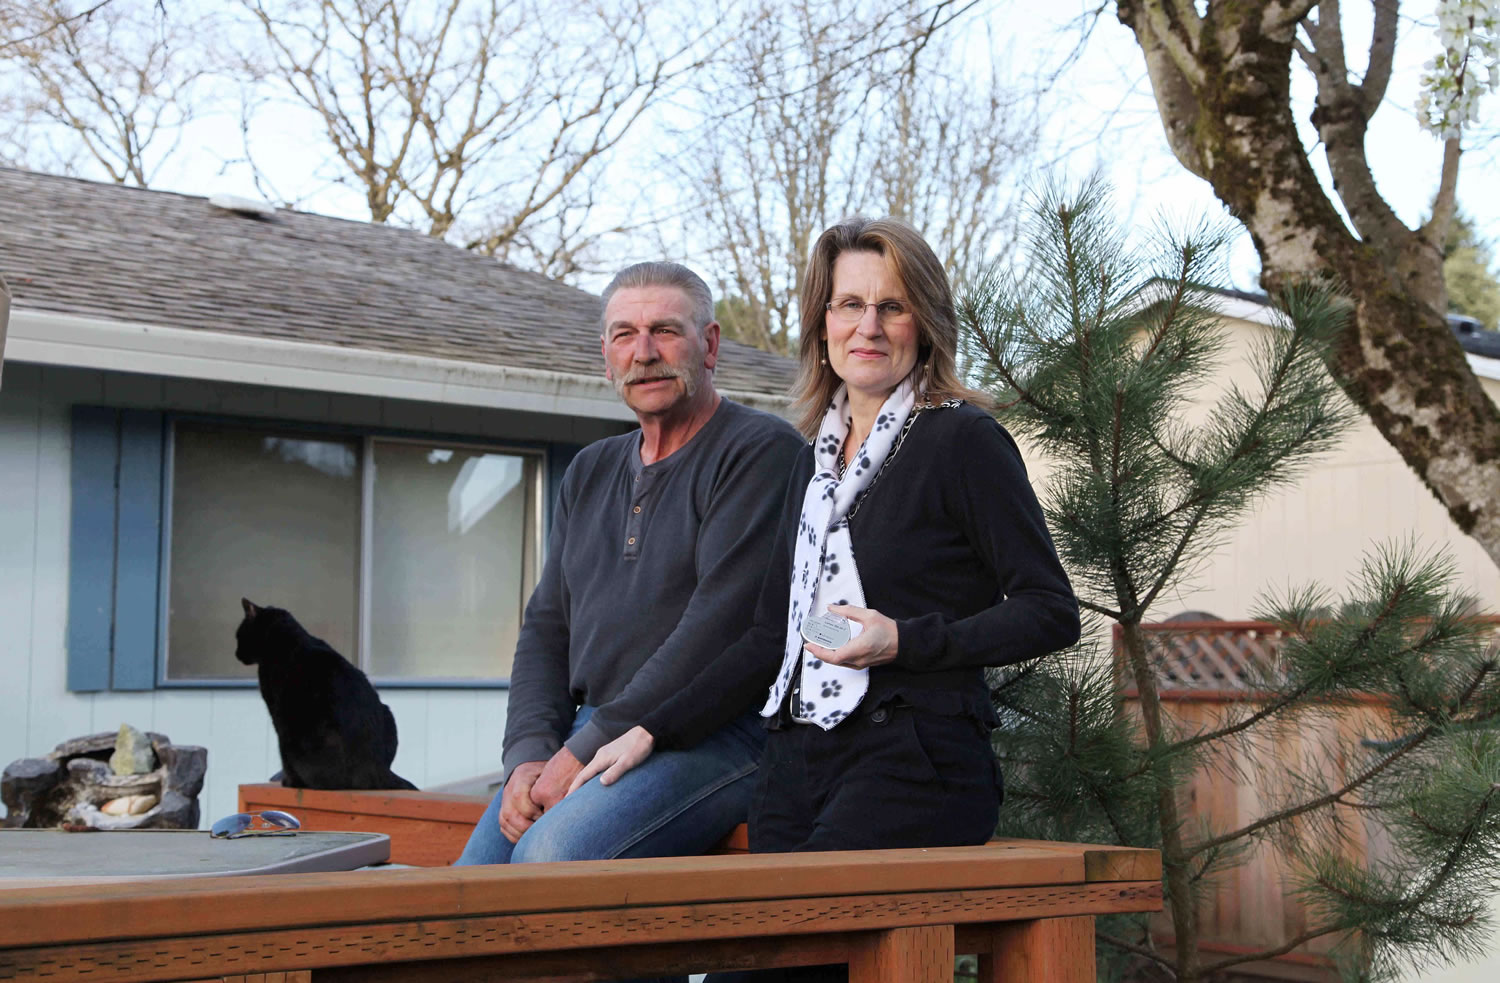 Michael and Diedre Gibbons sit on their porch in Aloha, Ore., on March 18. Diedre holds a pacemaker that's also implanted in her chest to help with congenital heart failure.